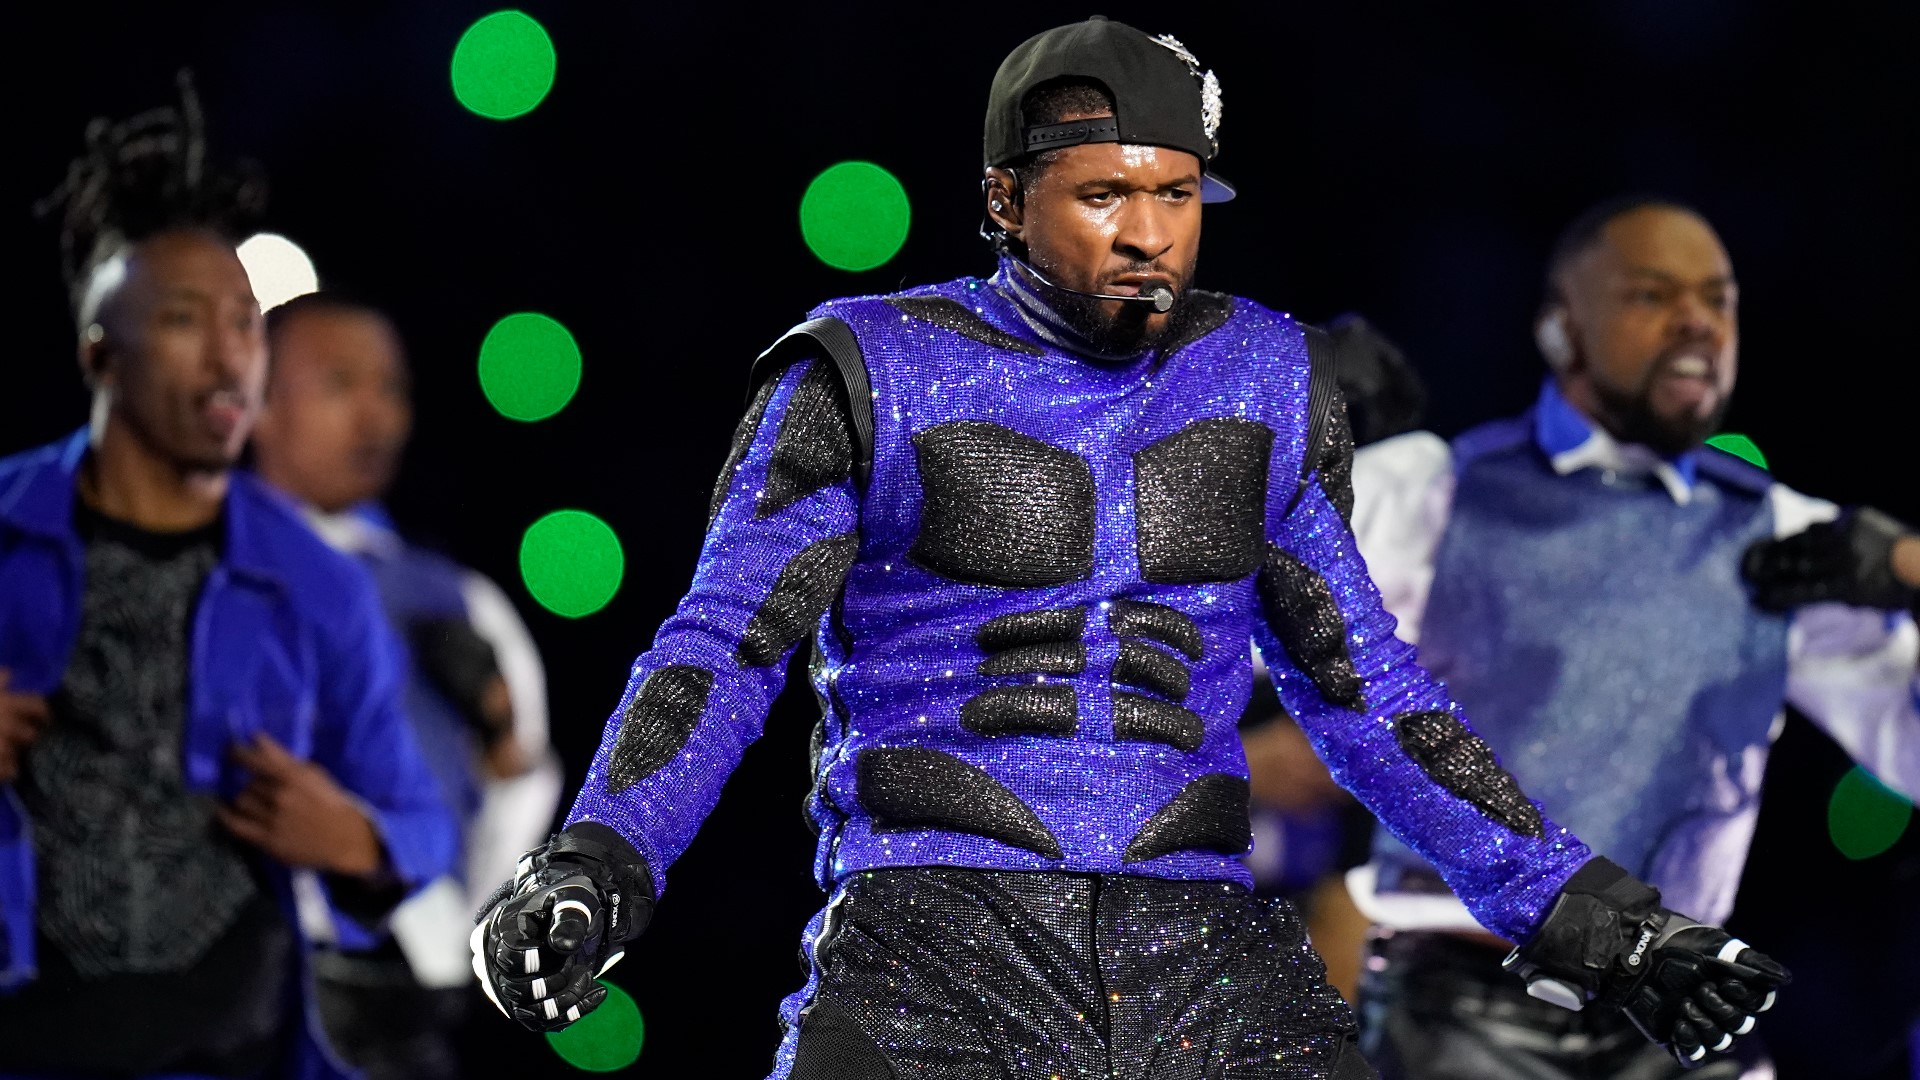 In an ode to Atlanta, Usher recounted his greatest hits and showcased his performance skills.